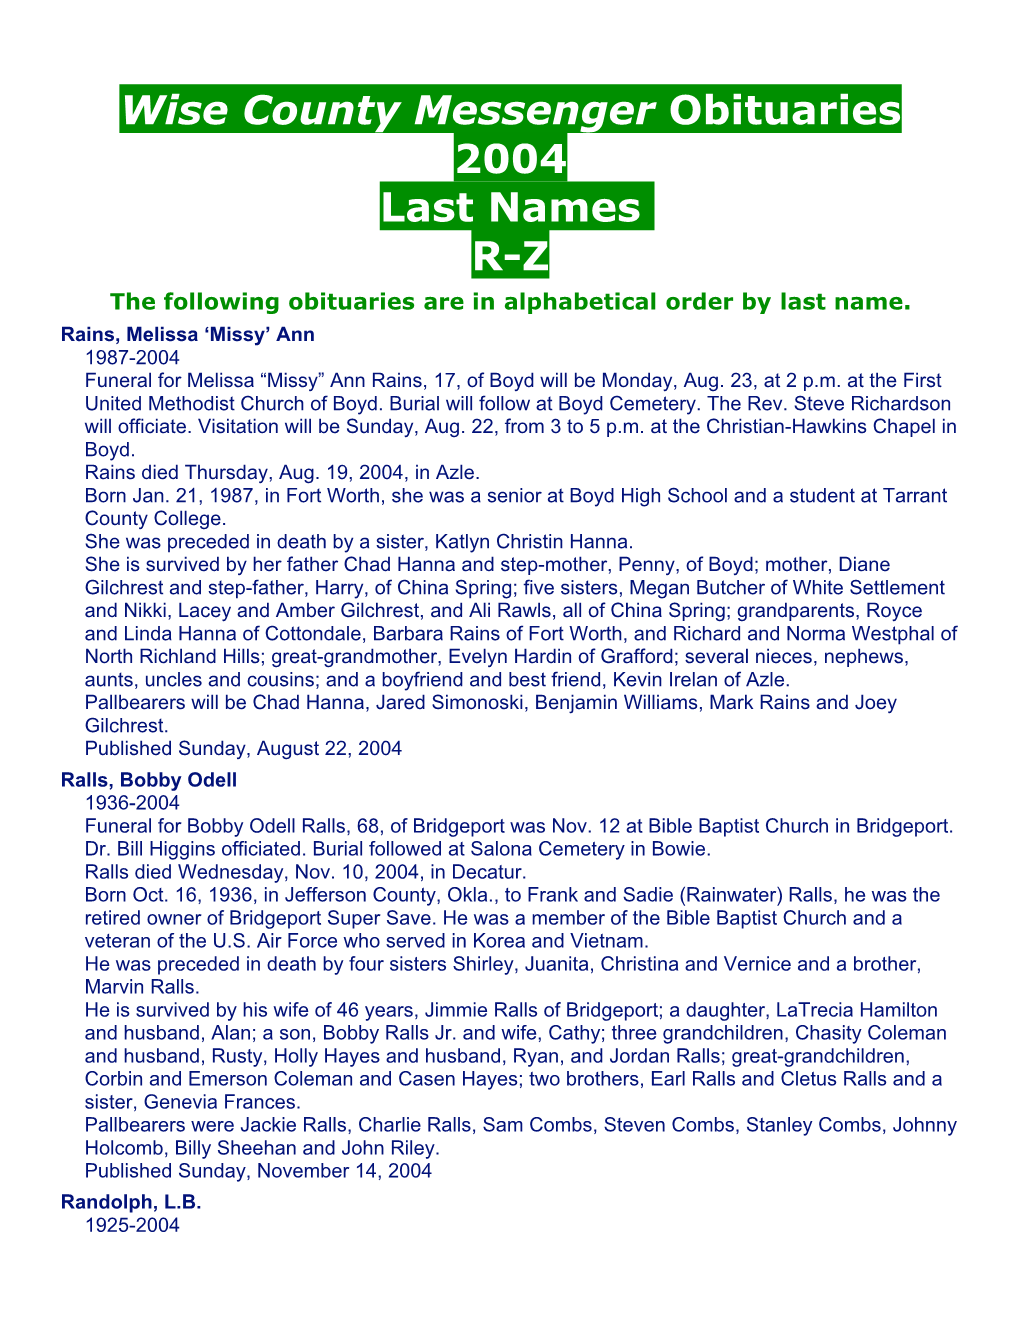 Wise County Messenger Obituaries 2004 Last Names R-Z the Following Obituaries Are in Alphabetical Order by Last Name